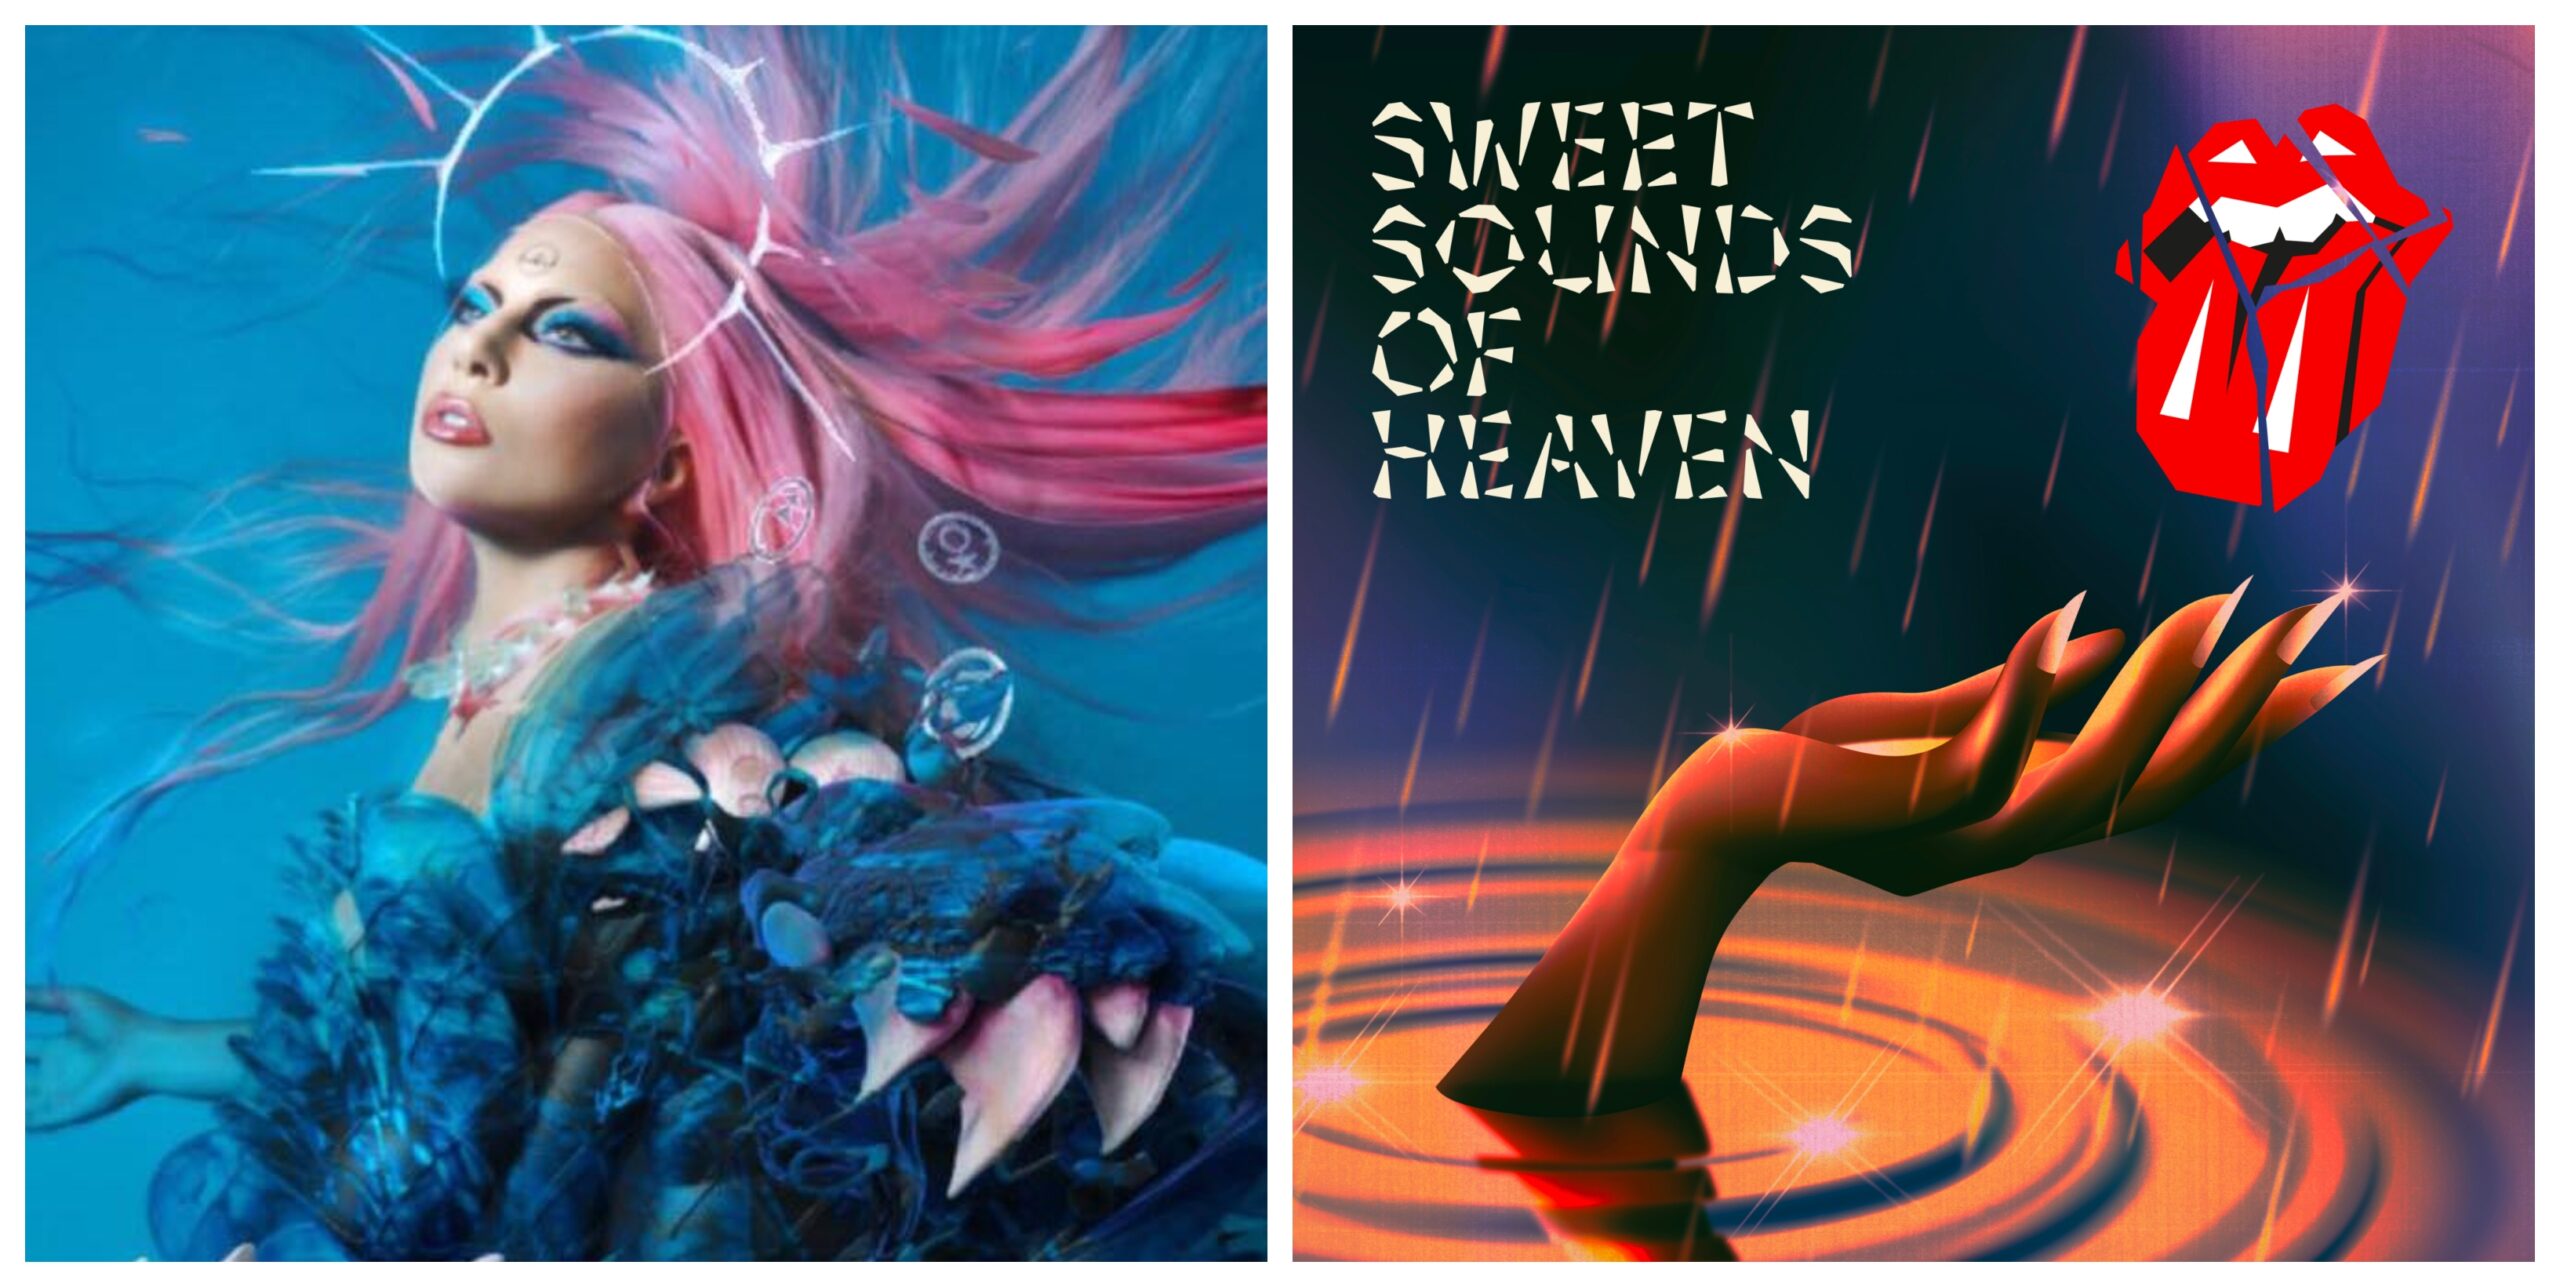 RDT Lady Gaga  Fan page on X: Sweet Sounds of Heaven - The